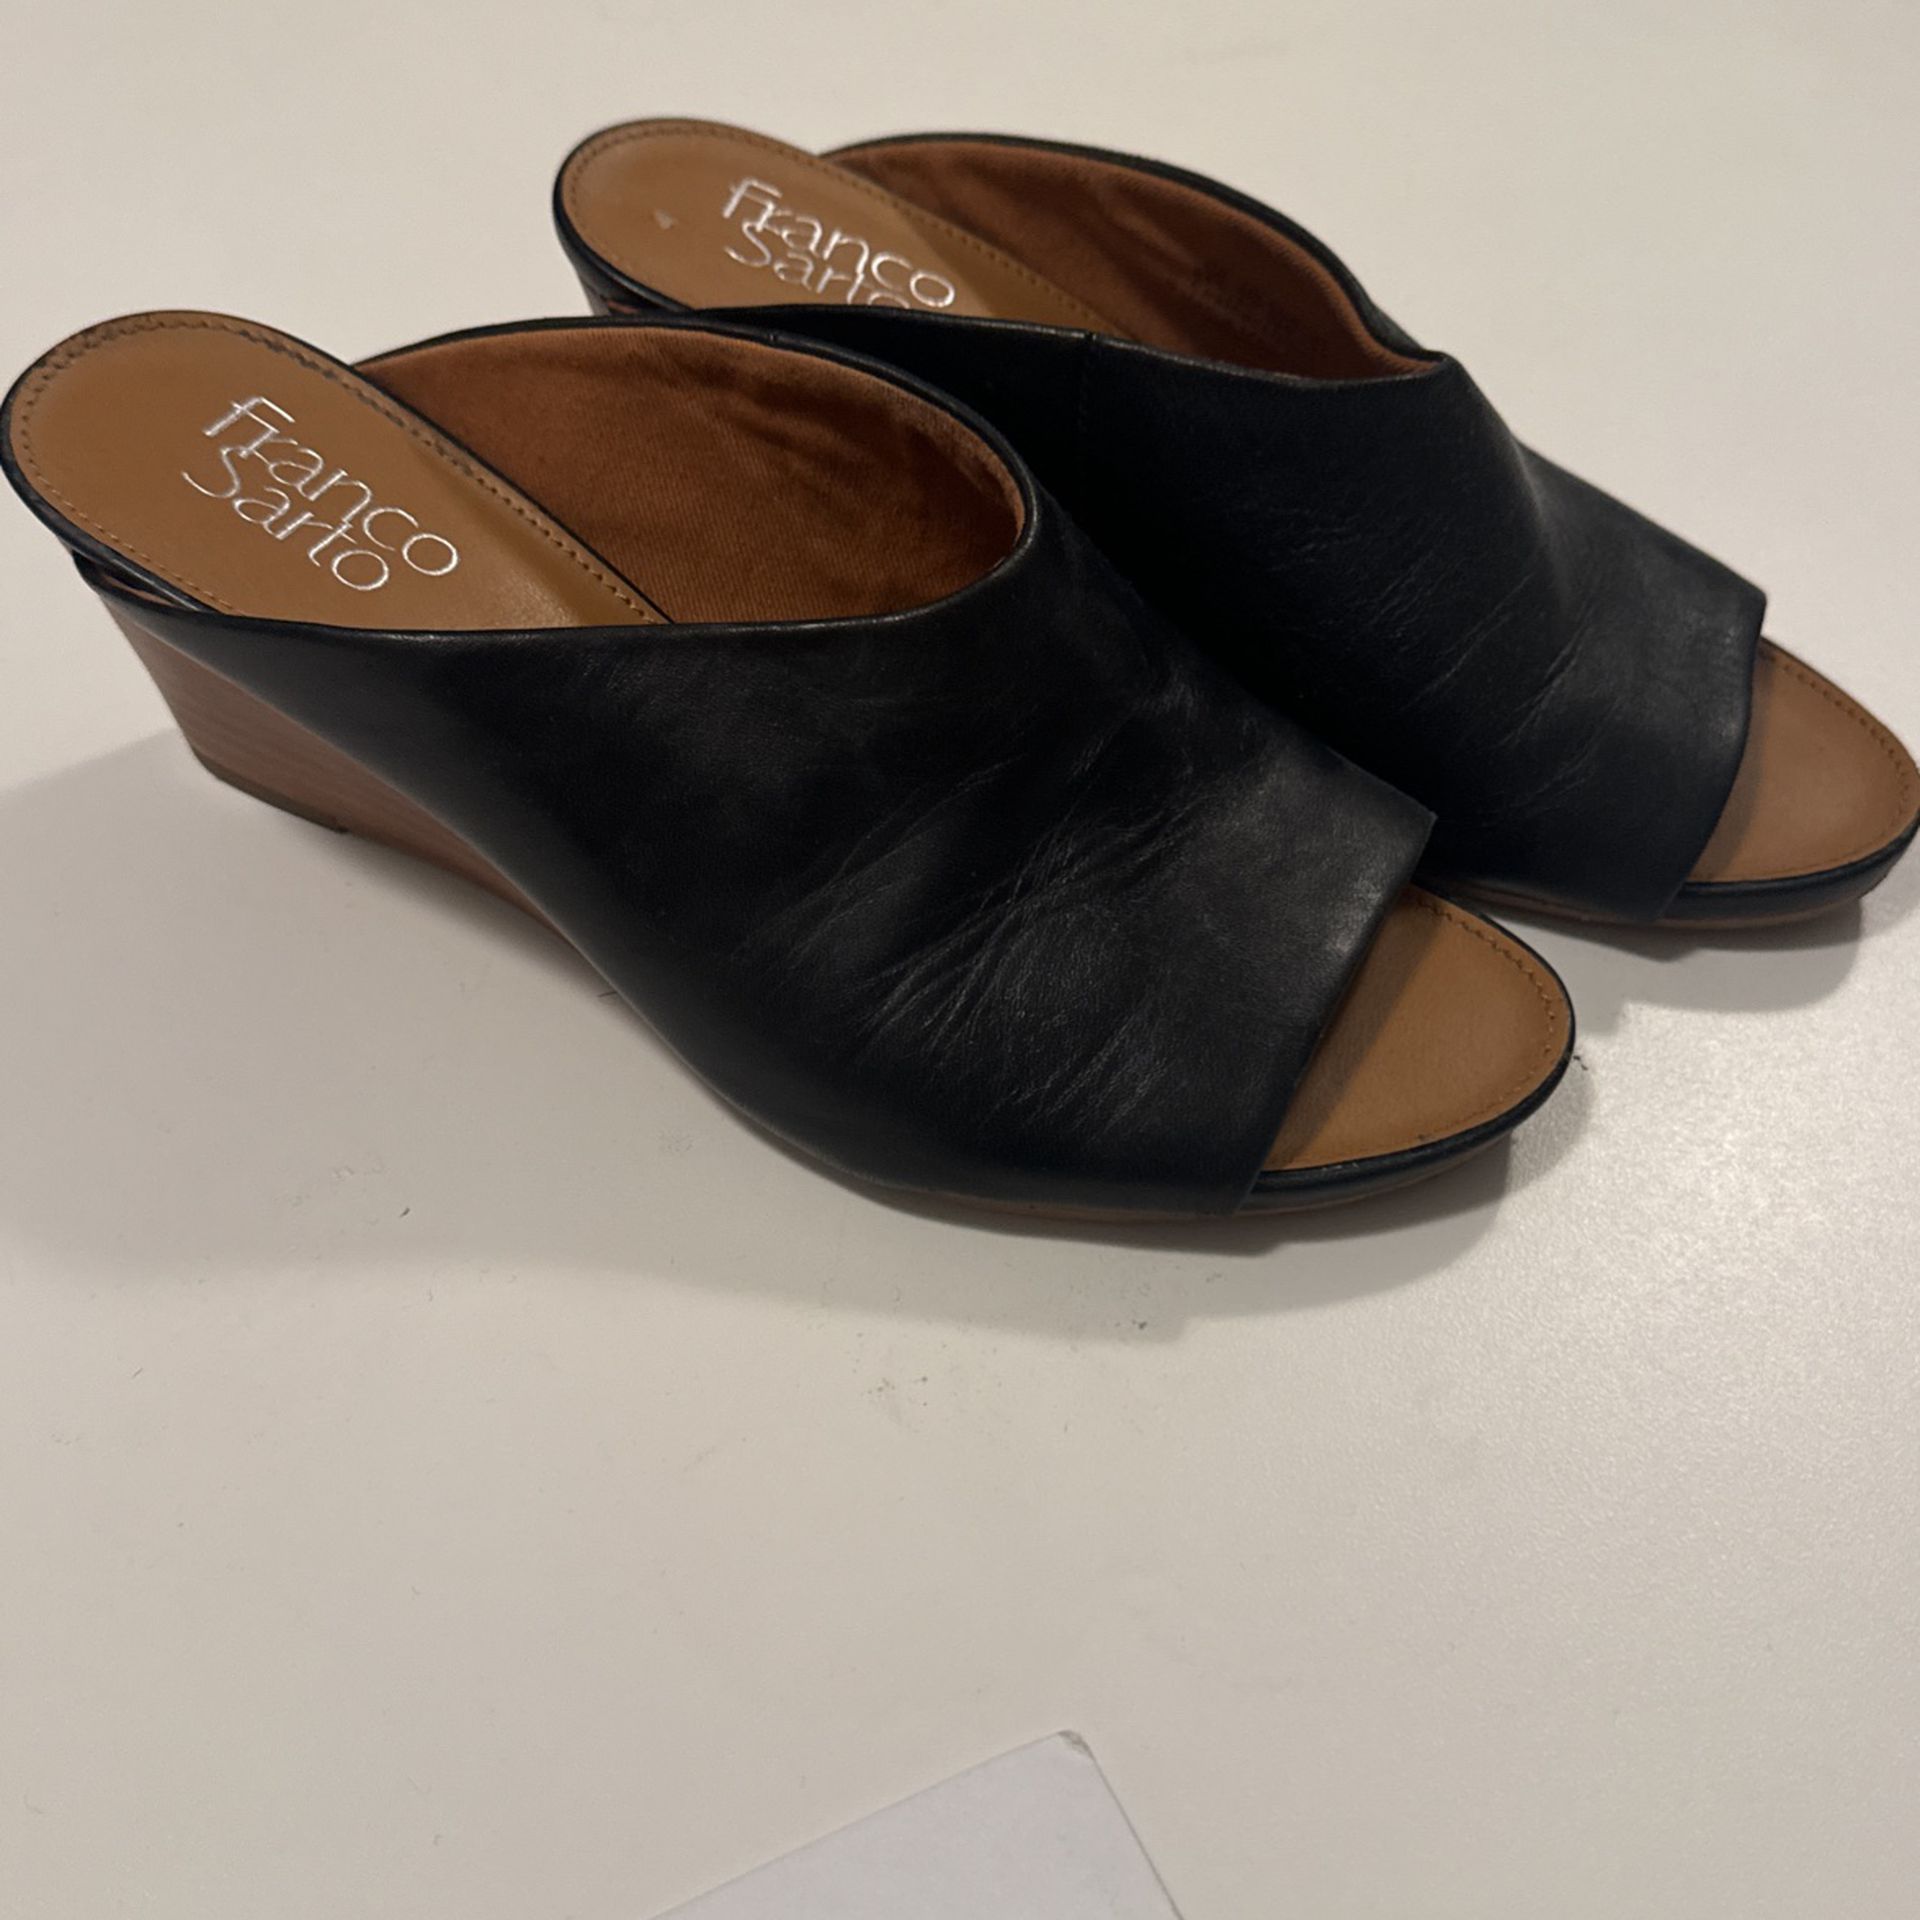 Franco Sarto Soft Leather Sandals with Heel. Size 6